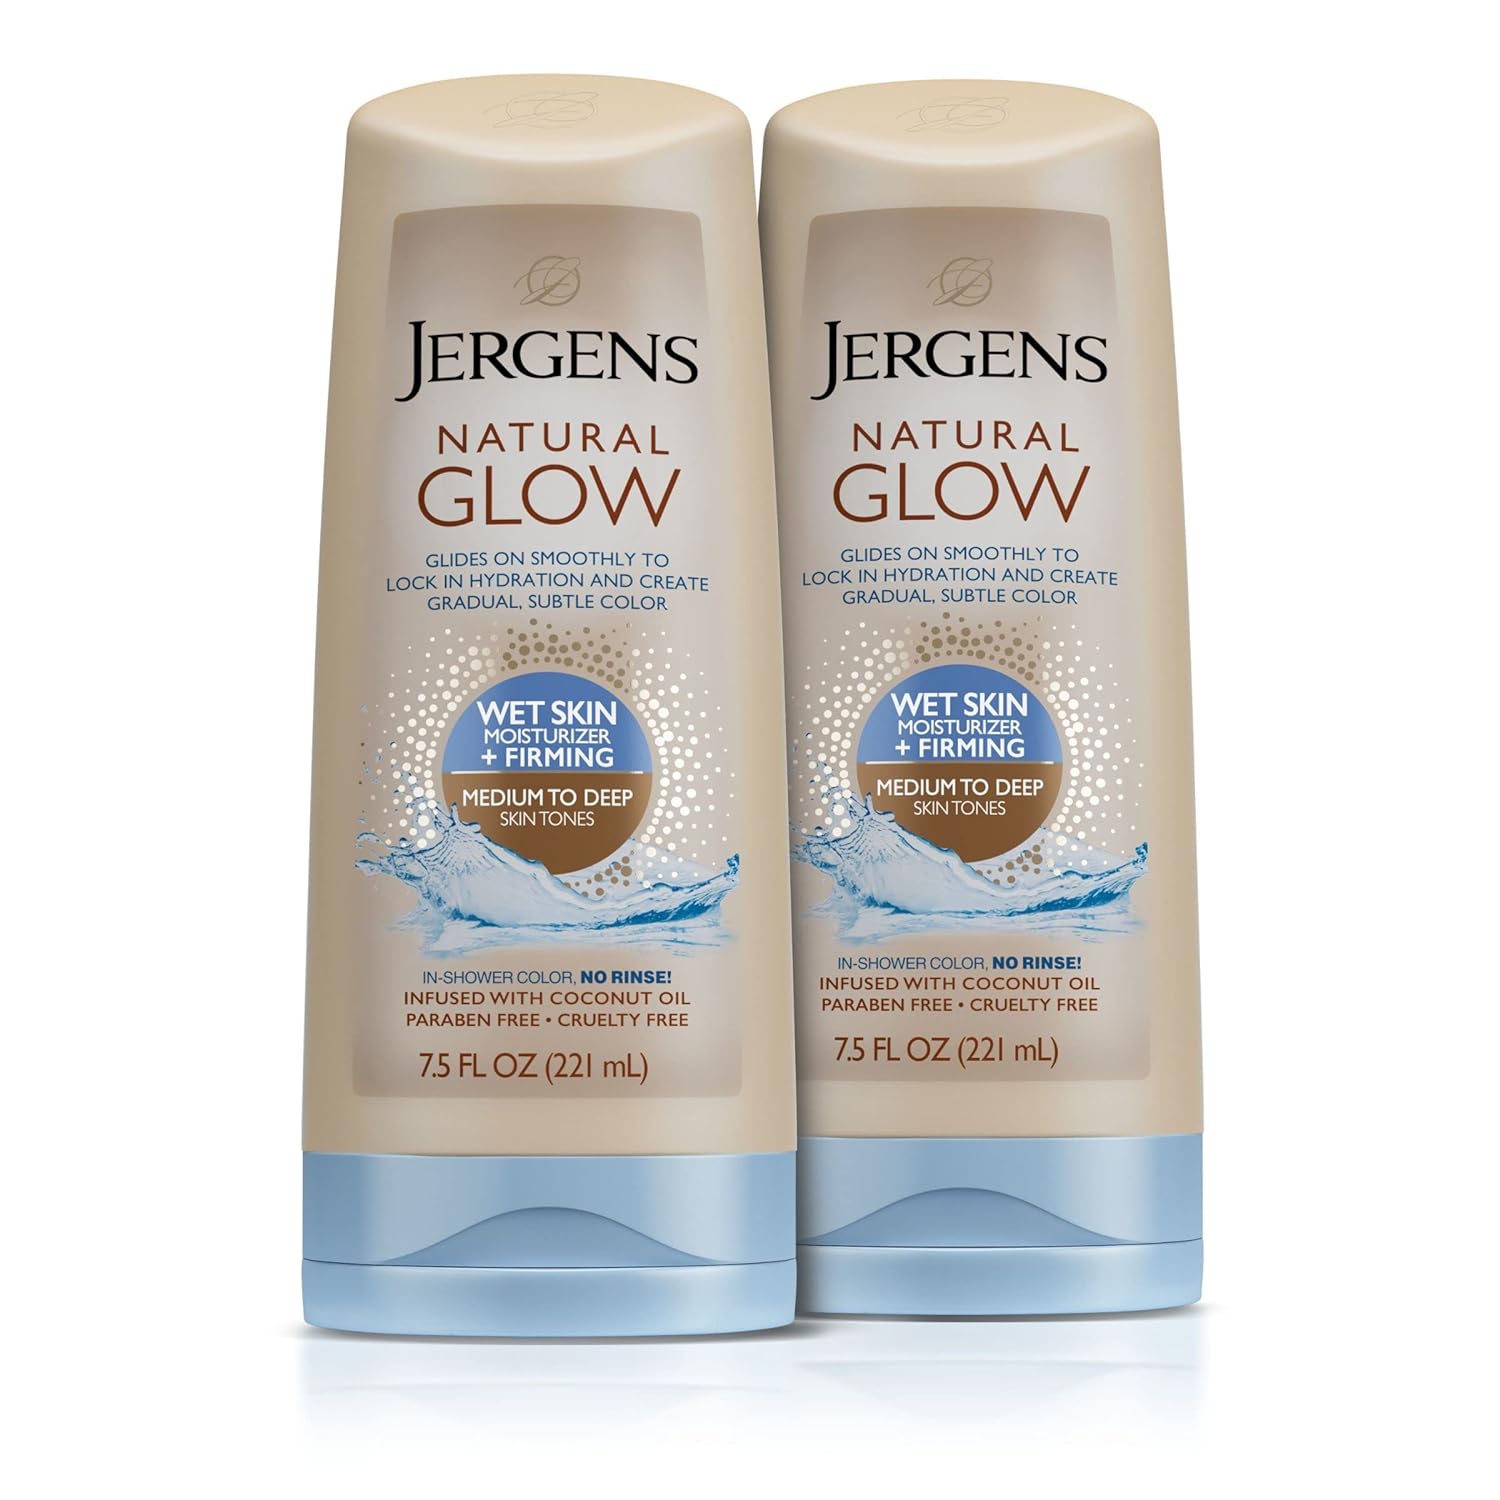 Jergens Natural Glow +FIRMING In-shower Self Tanner Body Lotion, Sunless Tanning for Medium to Tan Skin Tone, Anti Cellulite Firming Moisturizer, Gradual Fake Tan, 7.5 Ounce (Pack of 2)